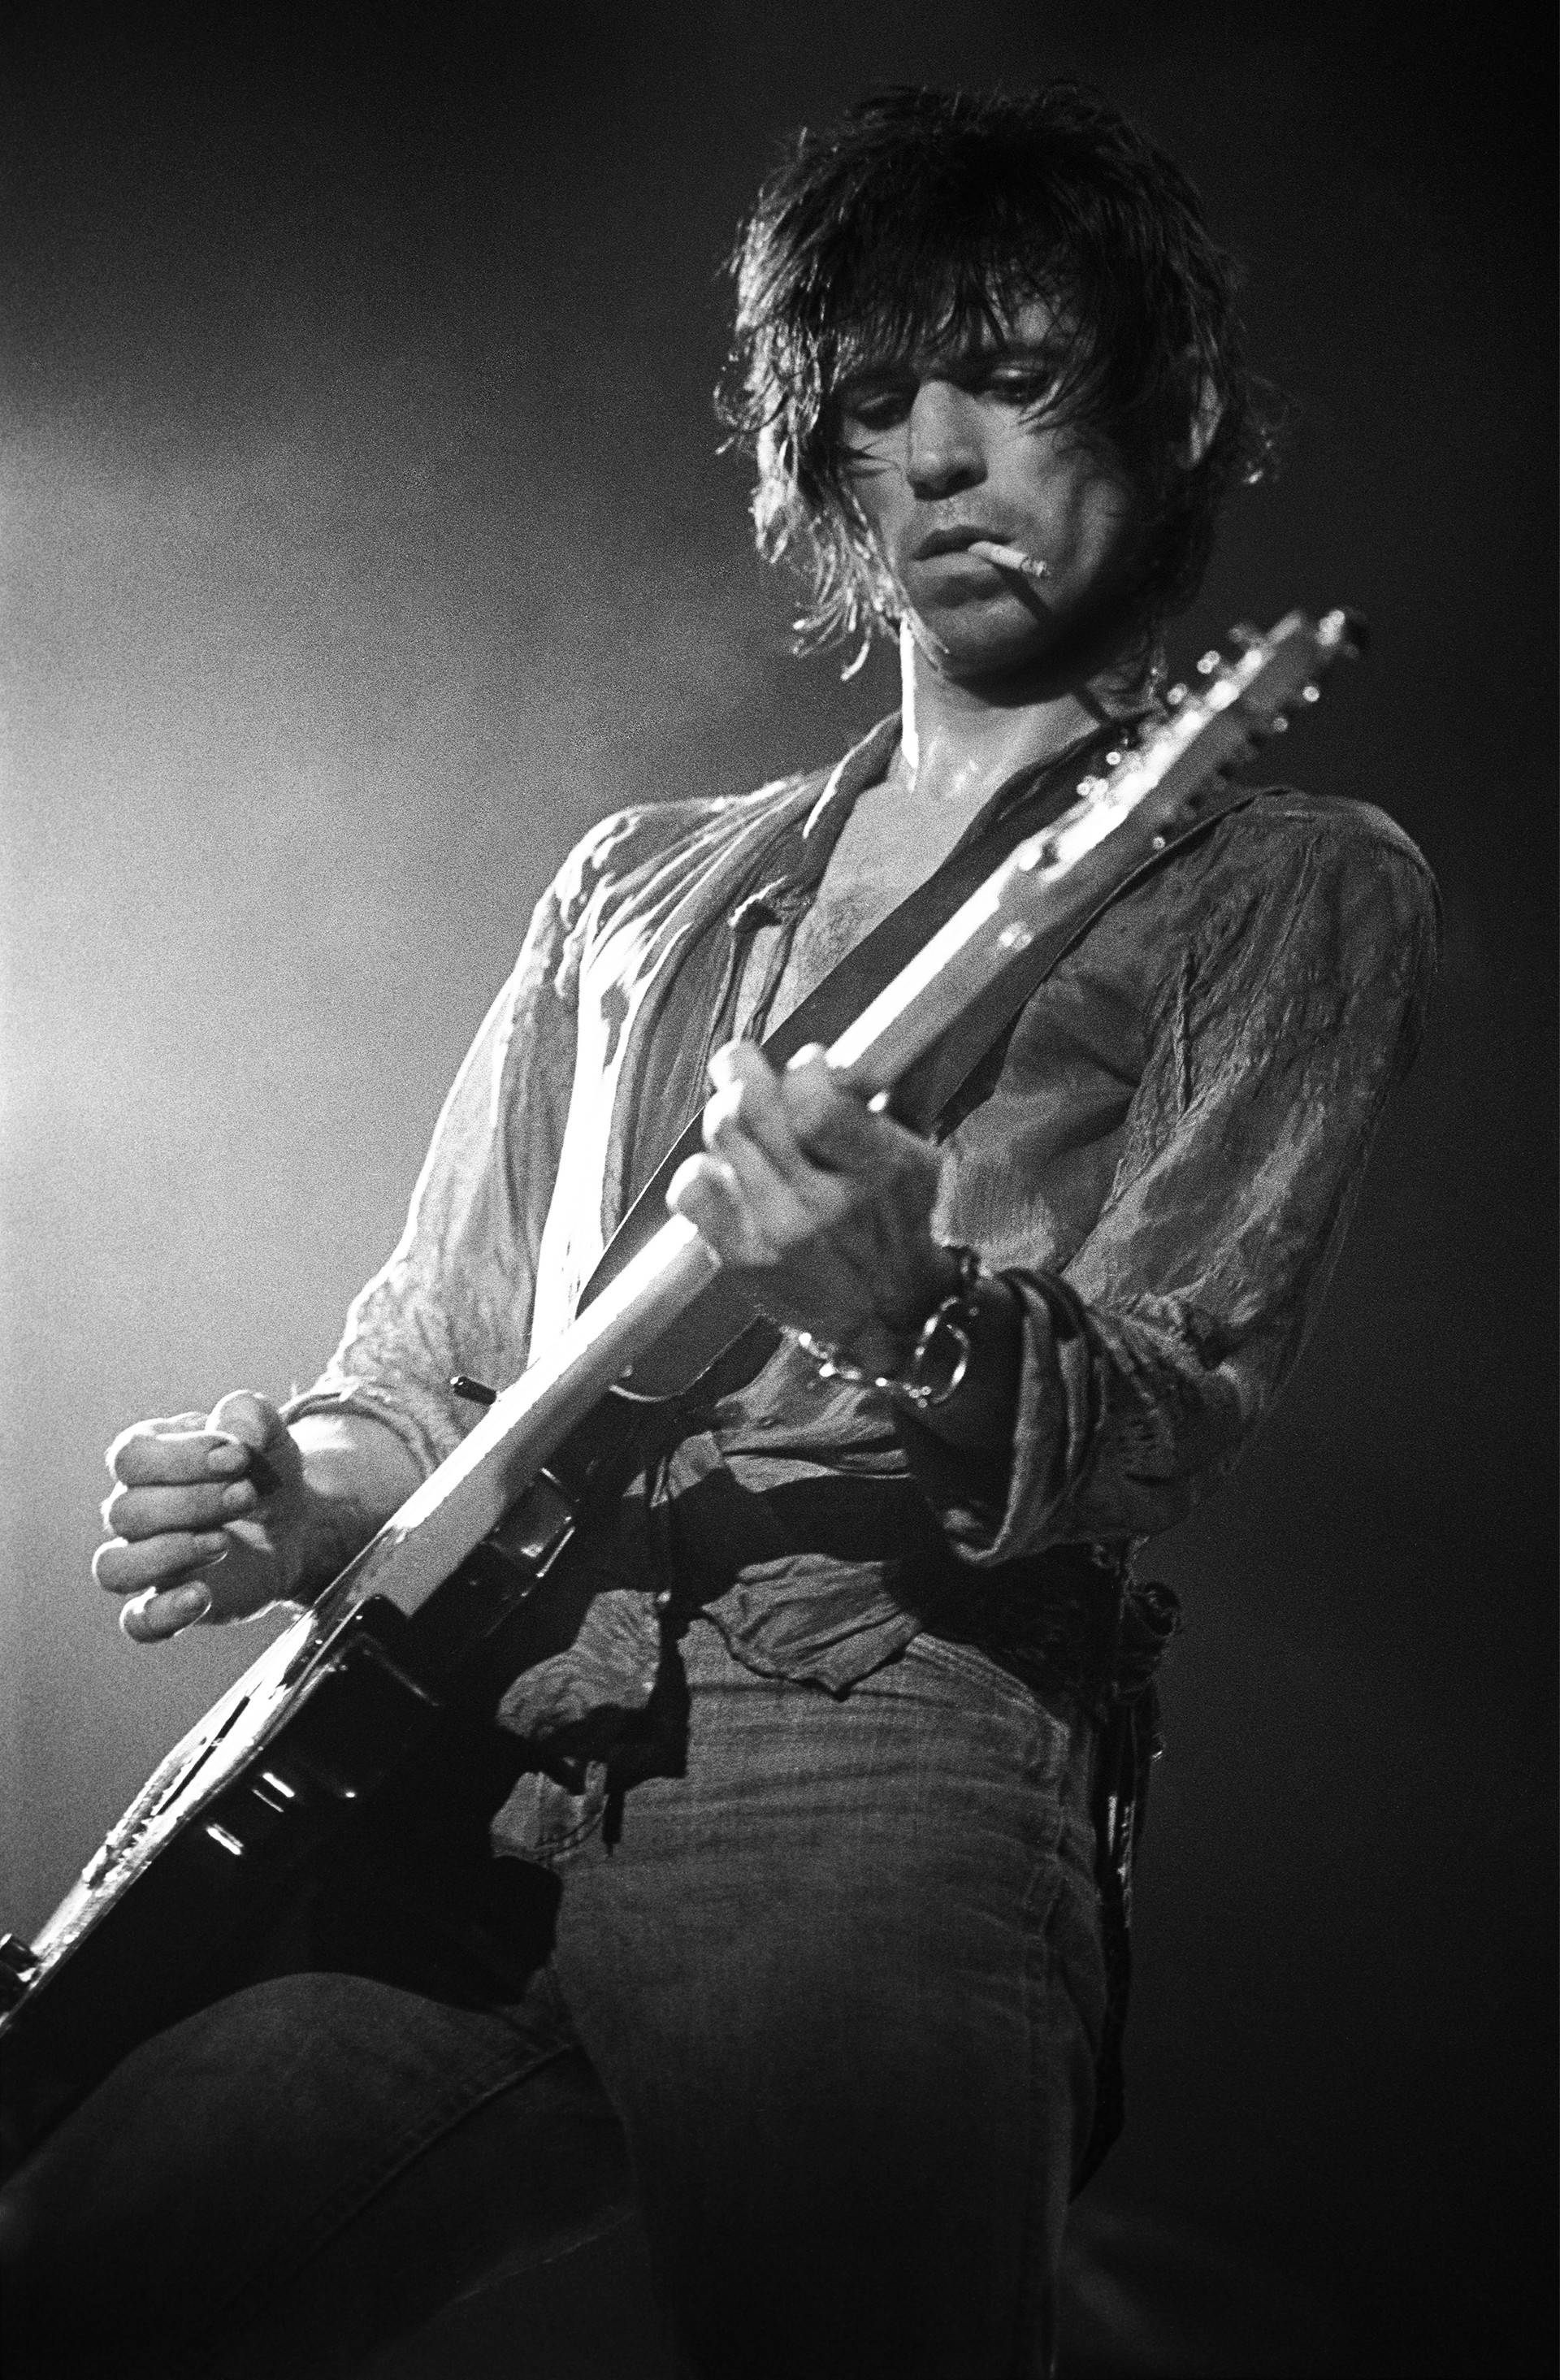 1920x2929 Keef has what we want. Whatever he is selling, we're buying it. The rebel,  the anti-hero, he's the antithesis of everything we're told we should be.